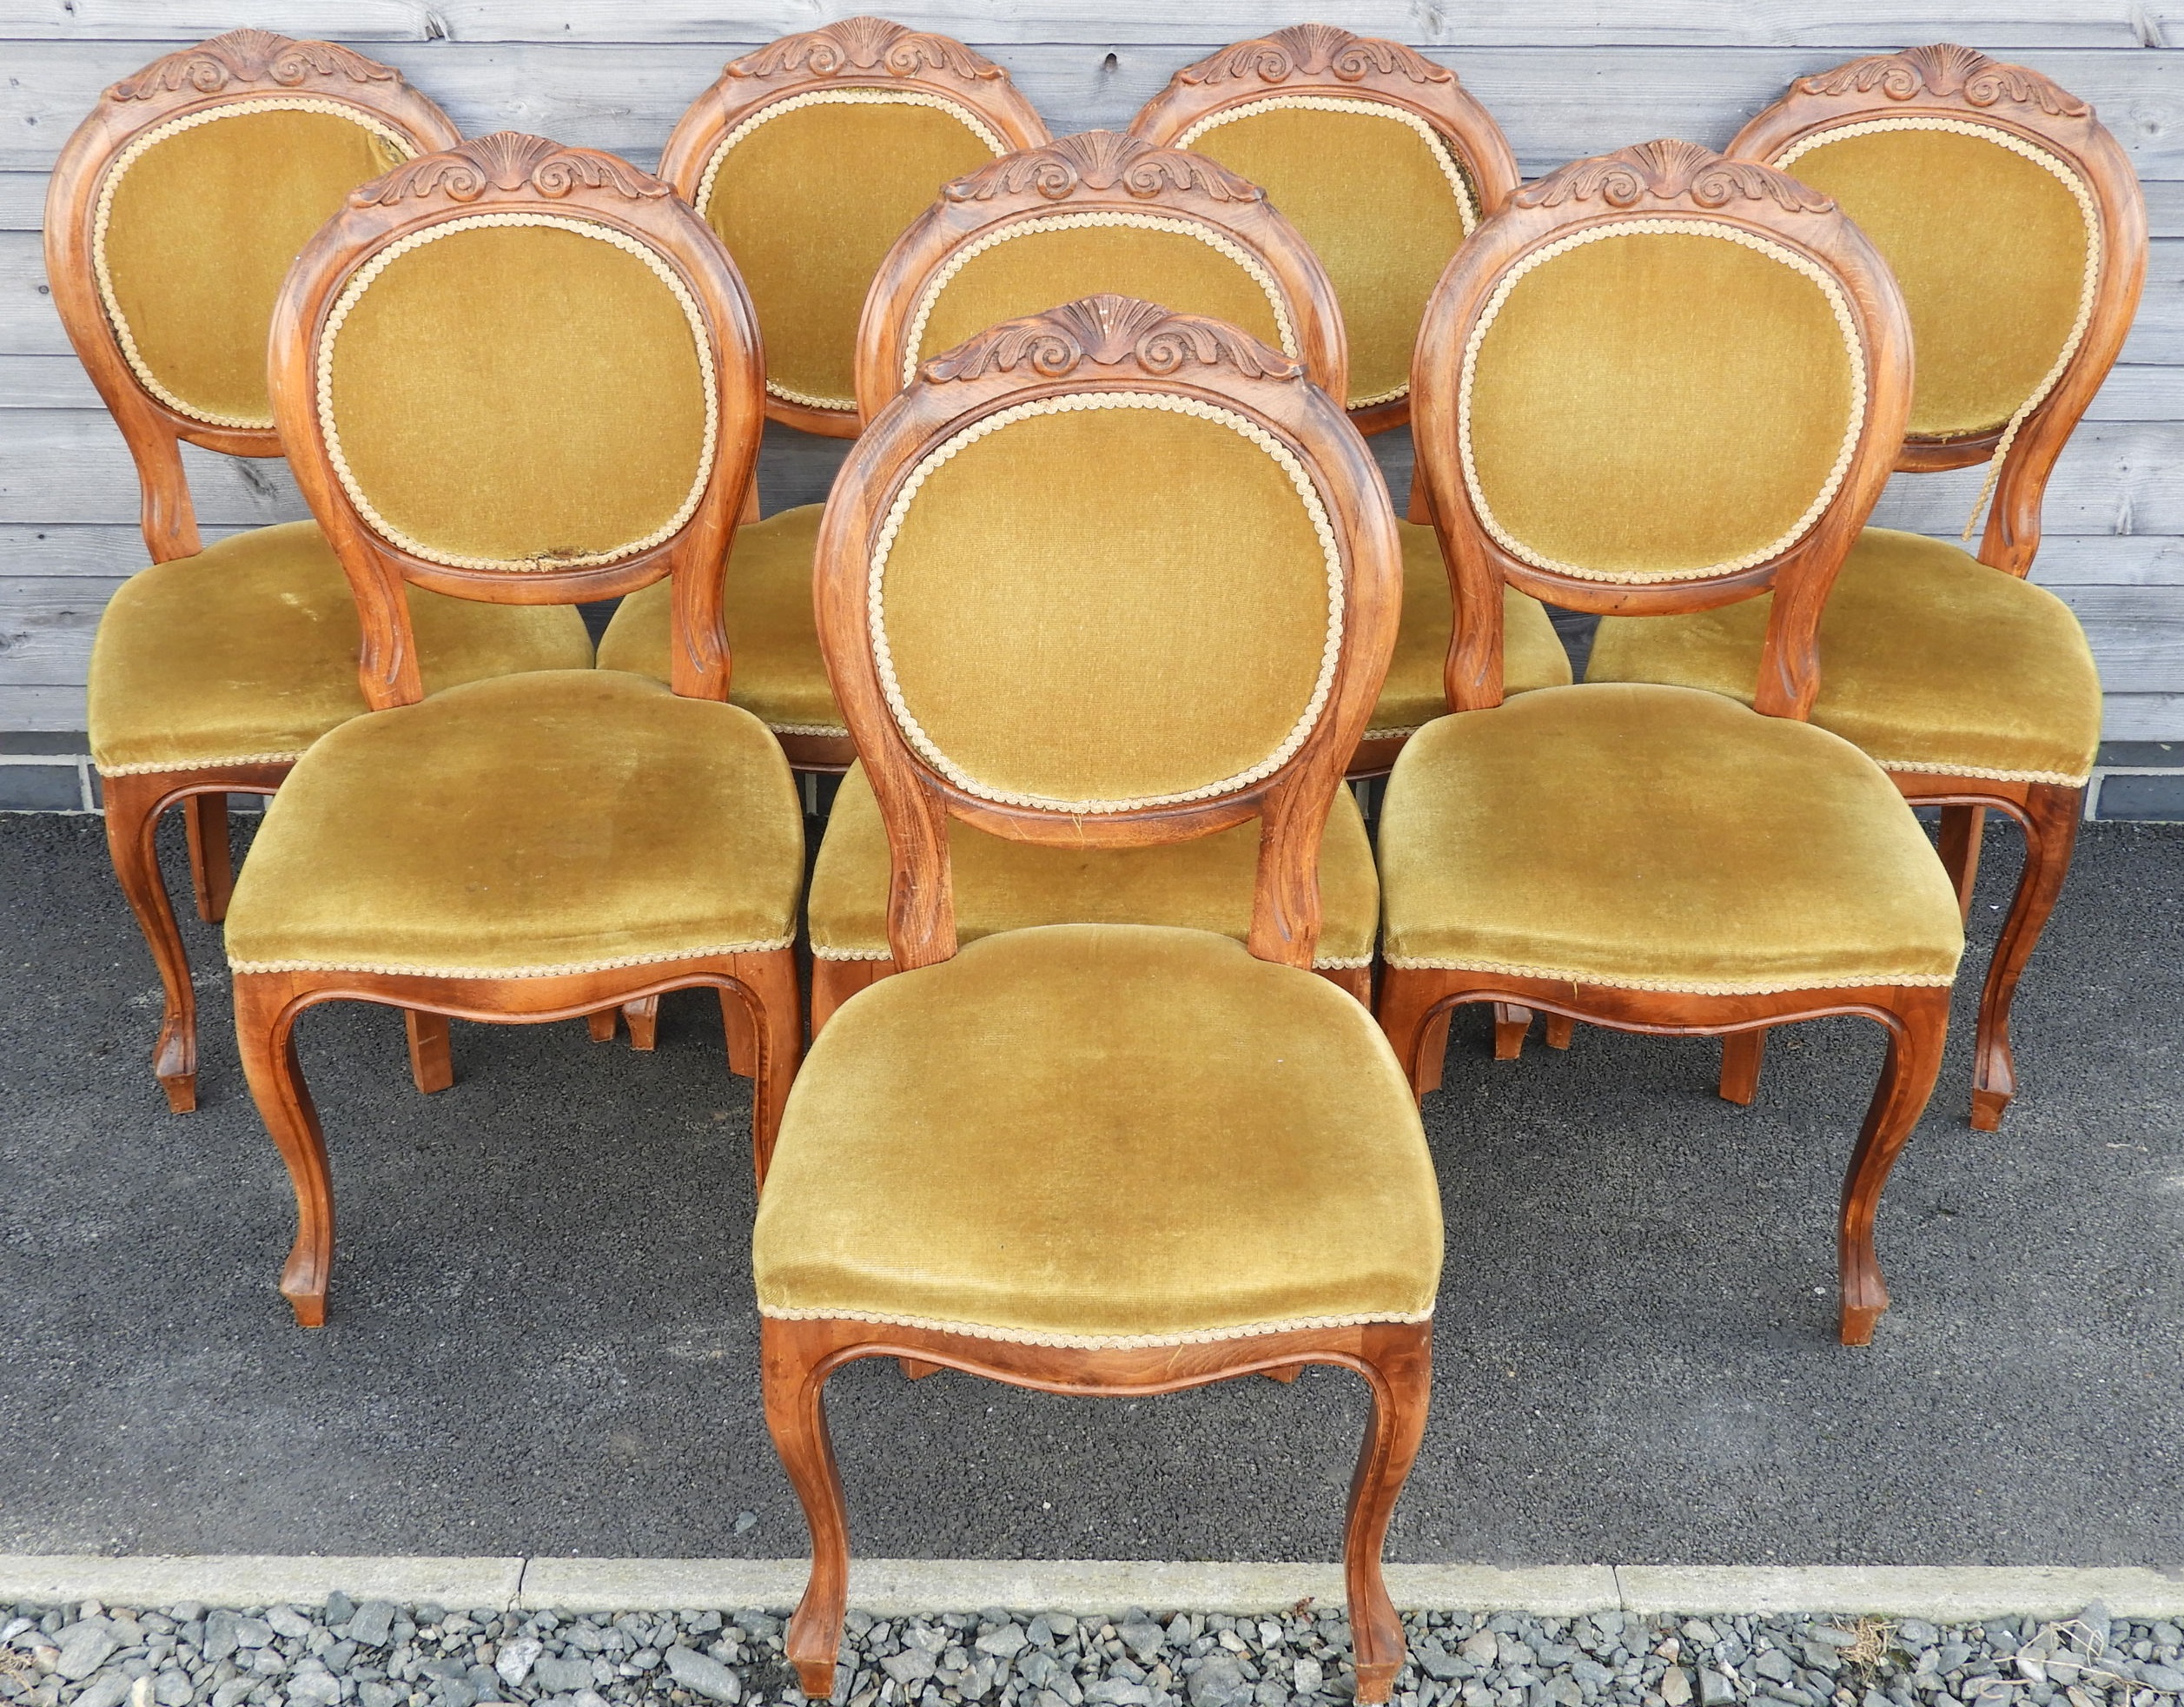 8 GOLD UPHOLSTERED DINING CHAIRS